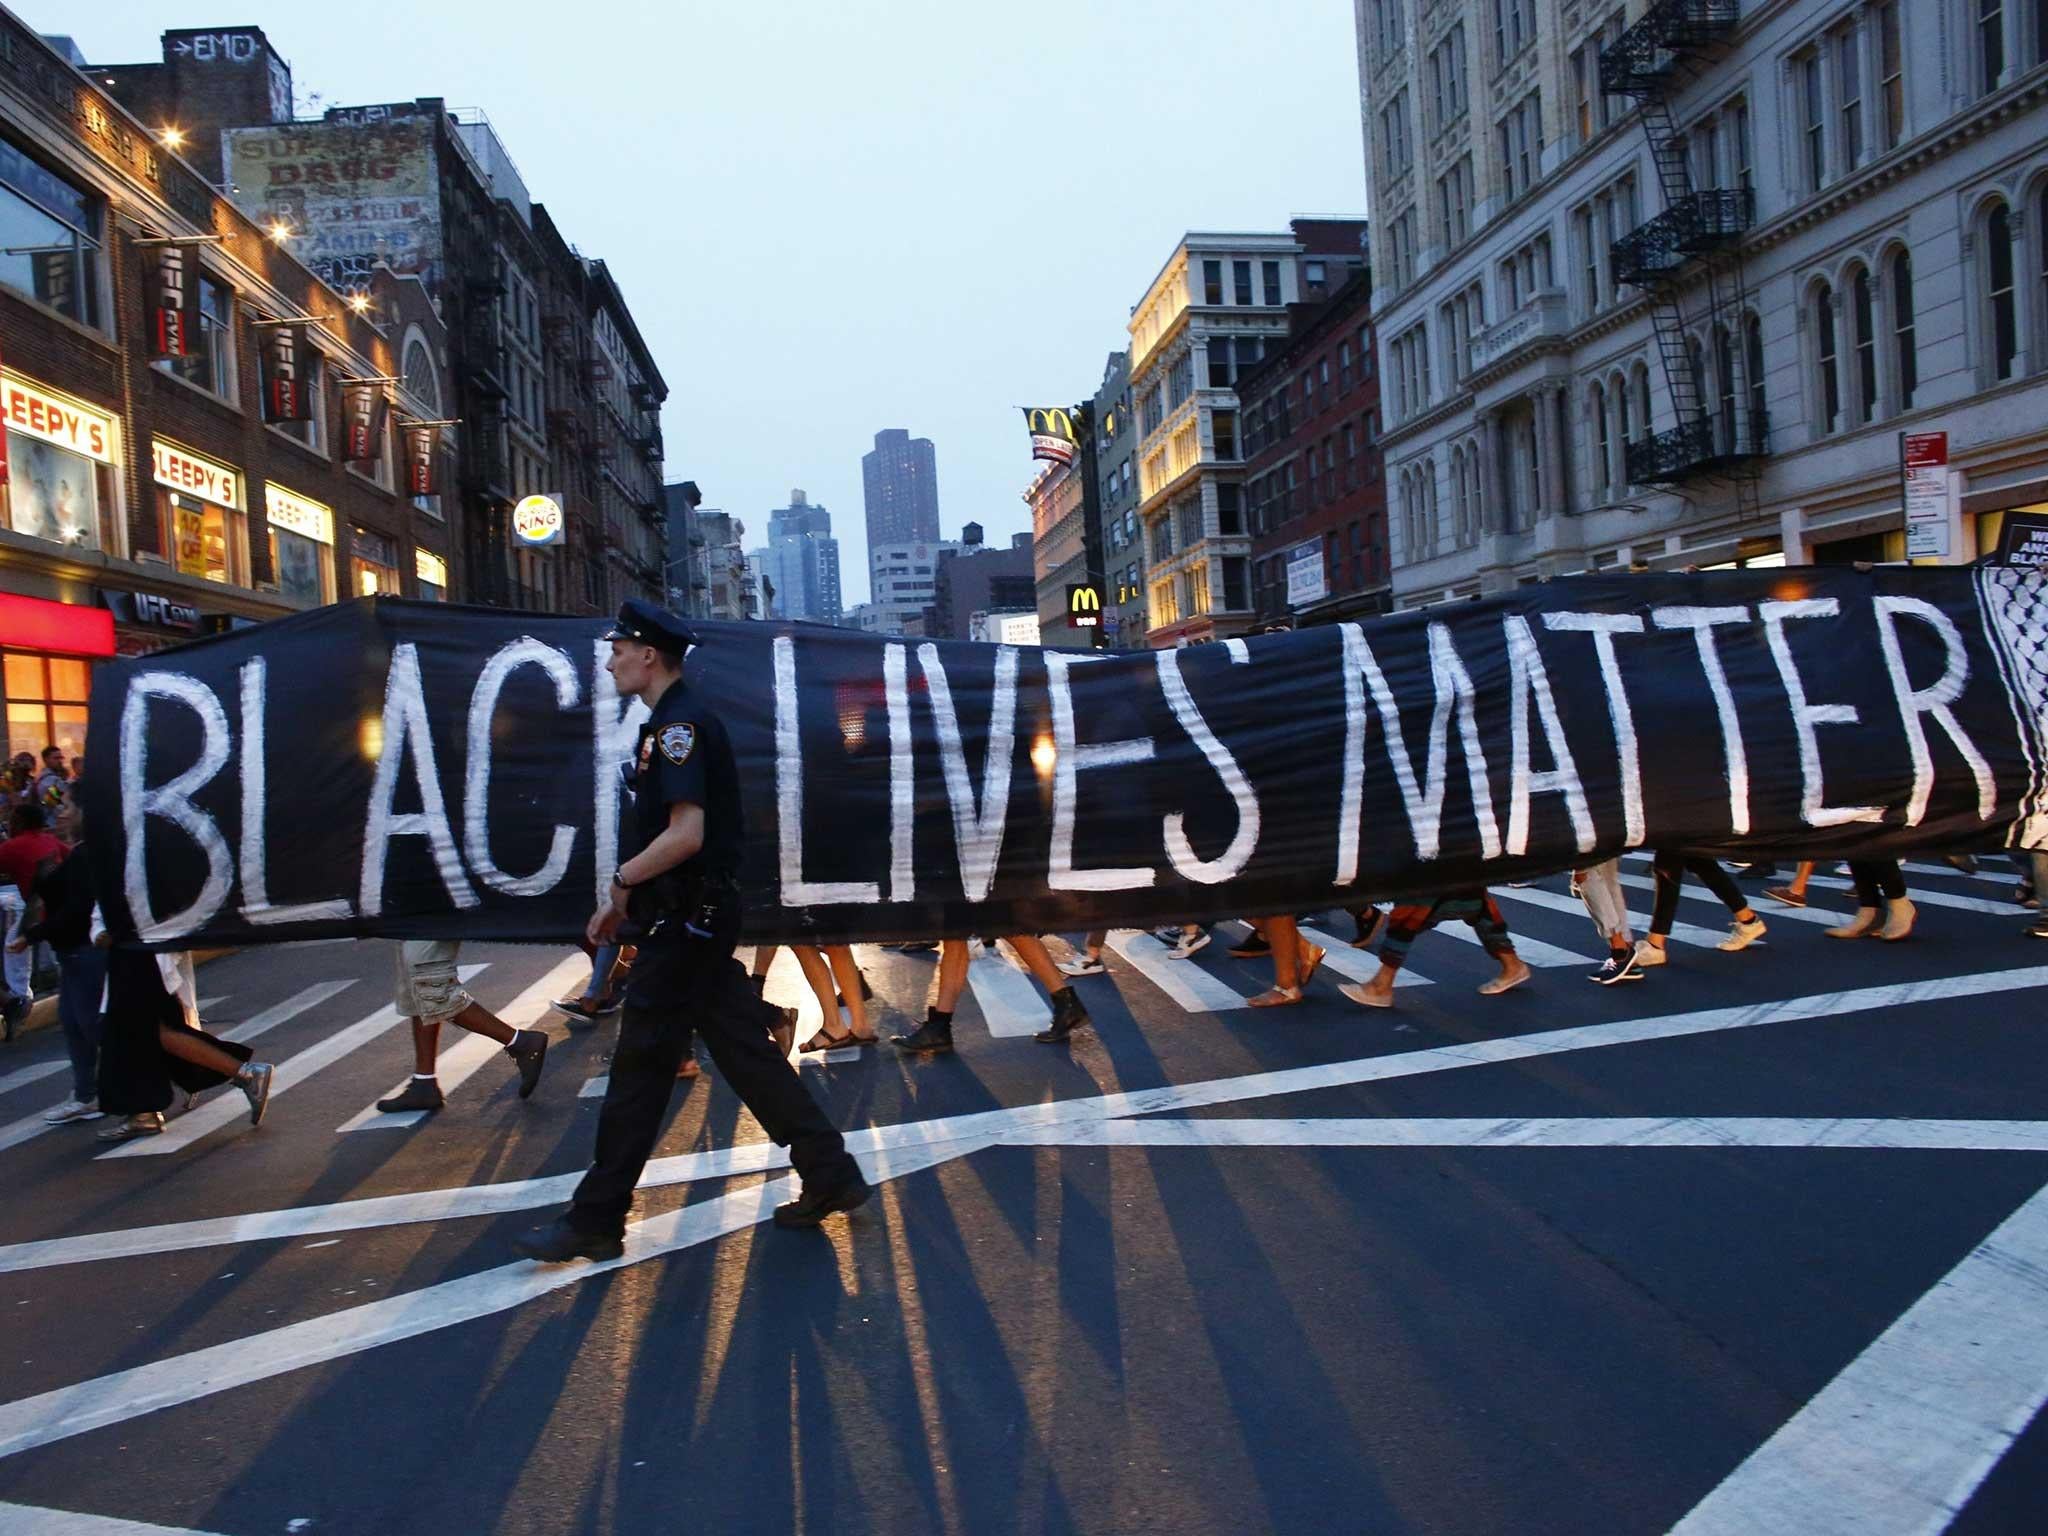 A protest in support of the Black Lives Matter movement in New York in July 2016